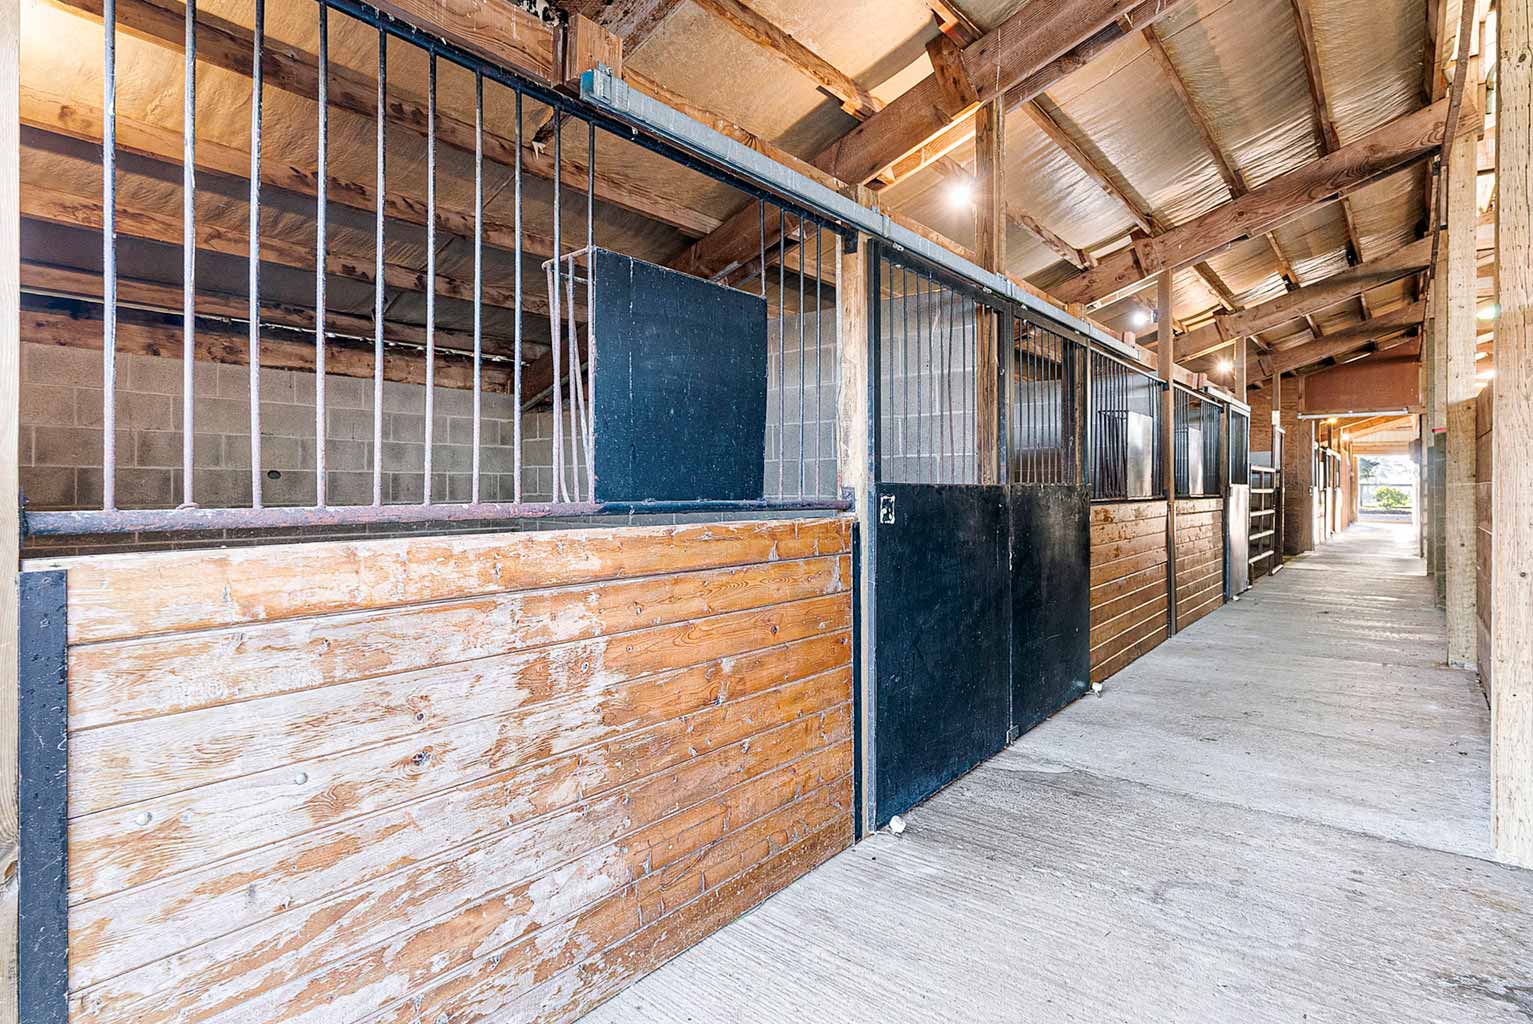 The main barn has a total of eleven 12' x 12' rubber-matted box stalls